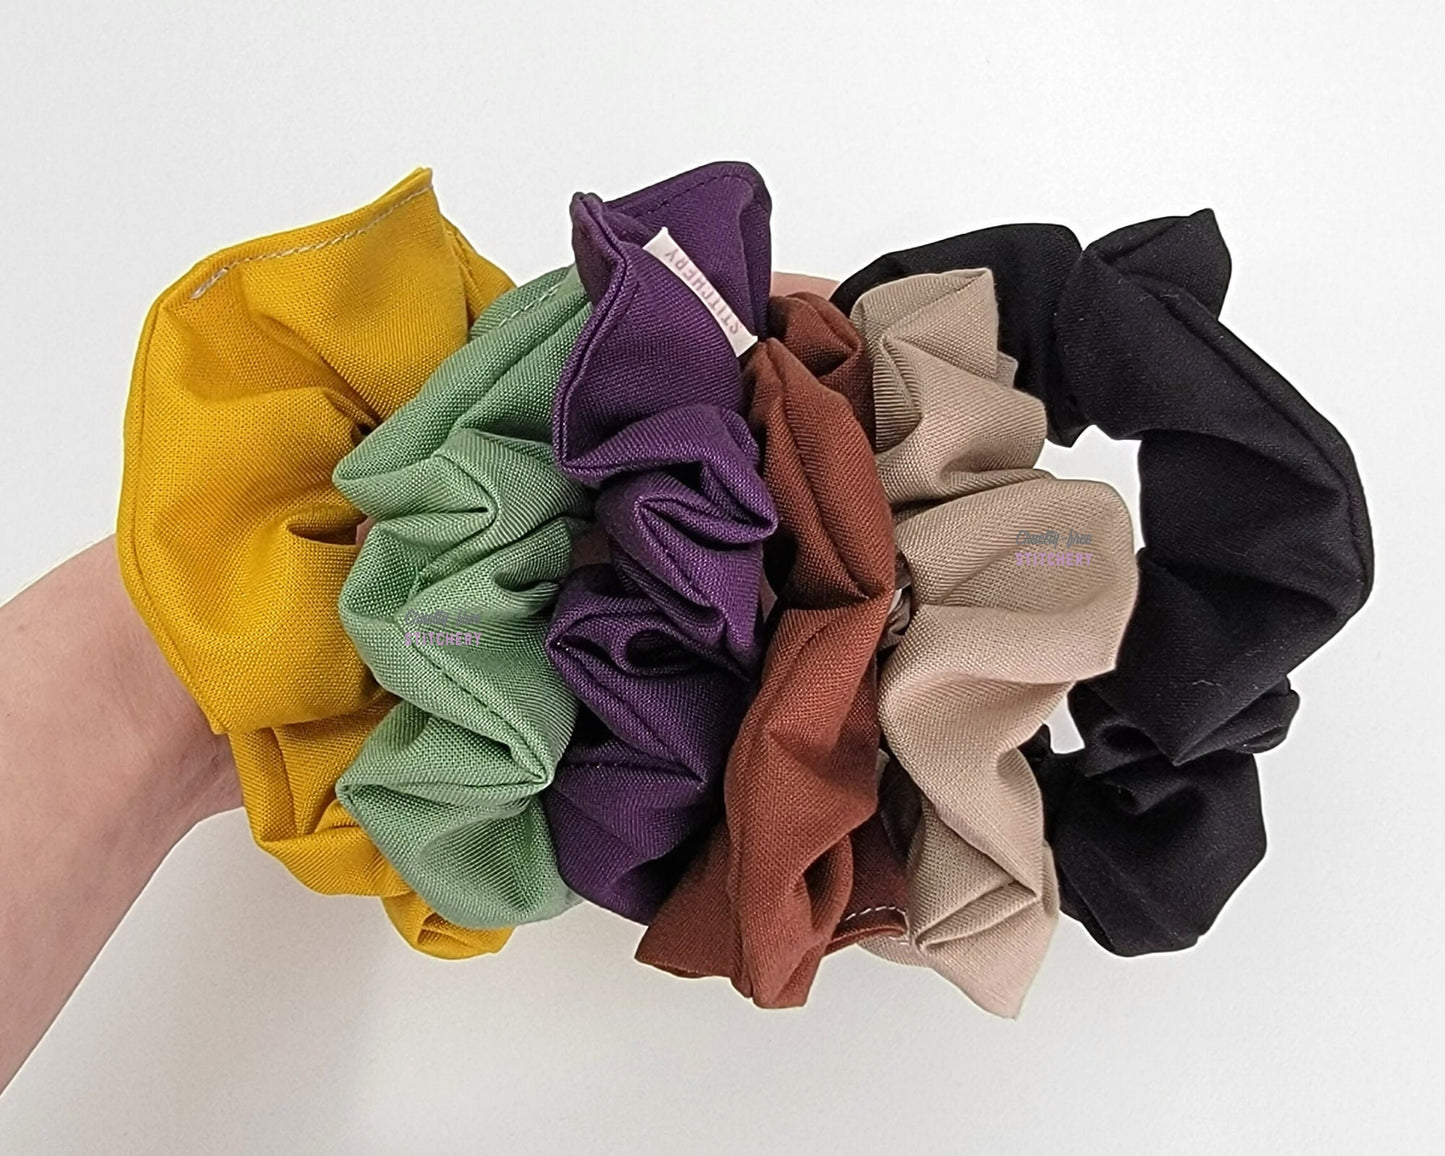 Bundle of solid color scrunchies - mustard yellow, sage green, dark purple, chocolate brown, light tan, and black.